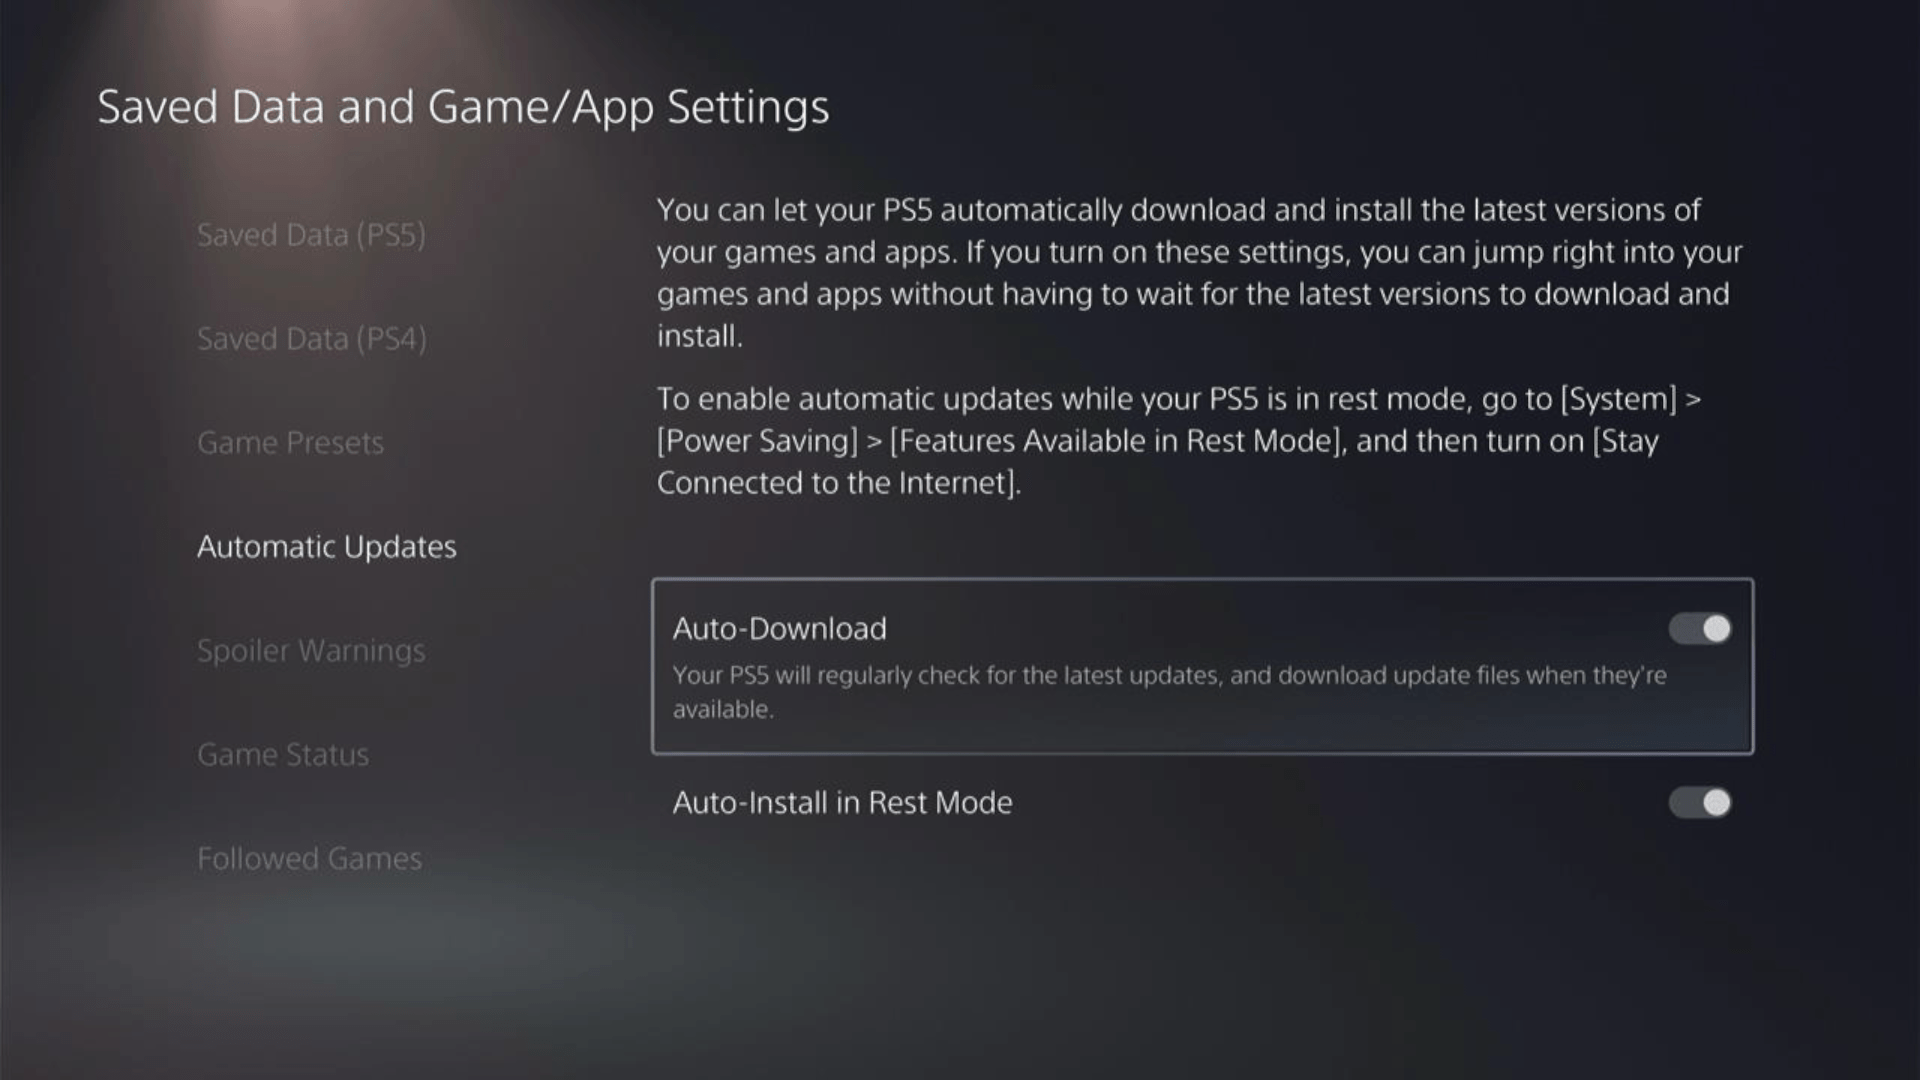 In the Saved Data and Game/App Settings window, select Automatic Updates from the left sidebar to enable automatic game updates to avoid shutdown